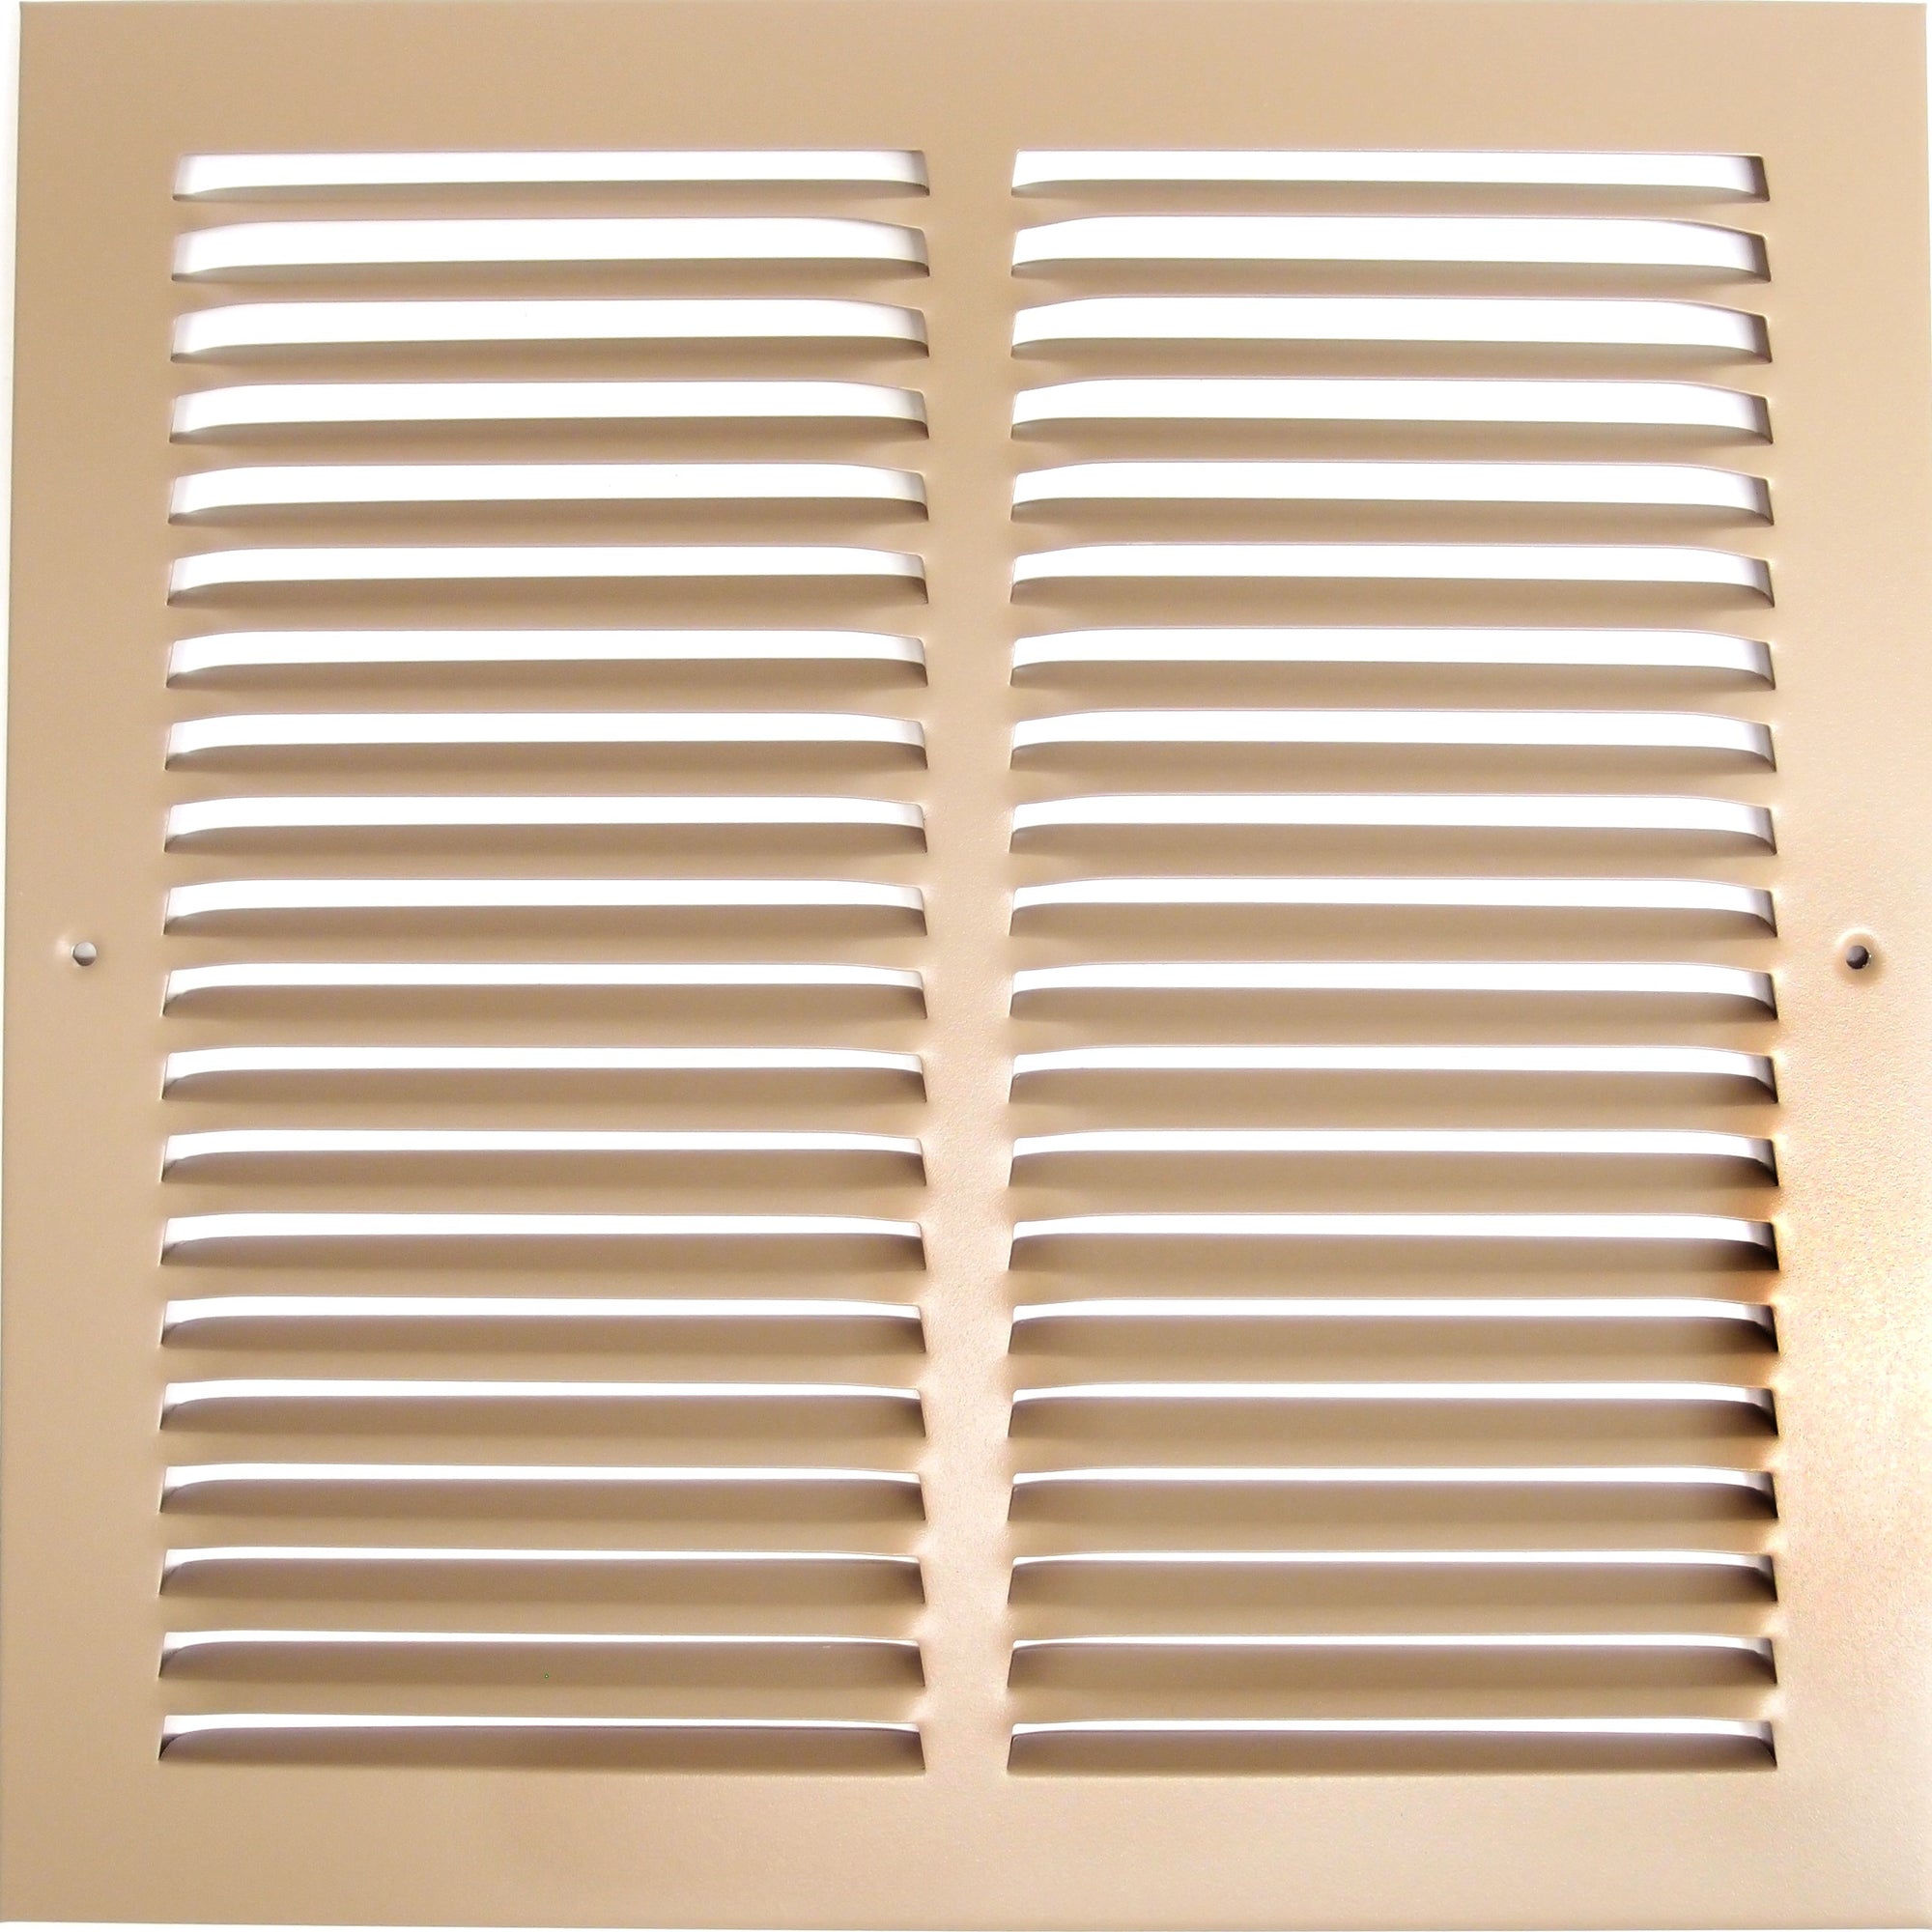 16" X 24" Air Vent Return Grilles - Sidewall and Ceiling - Steel